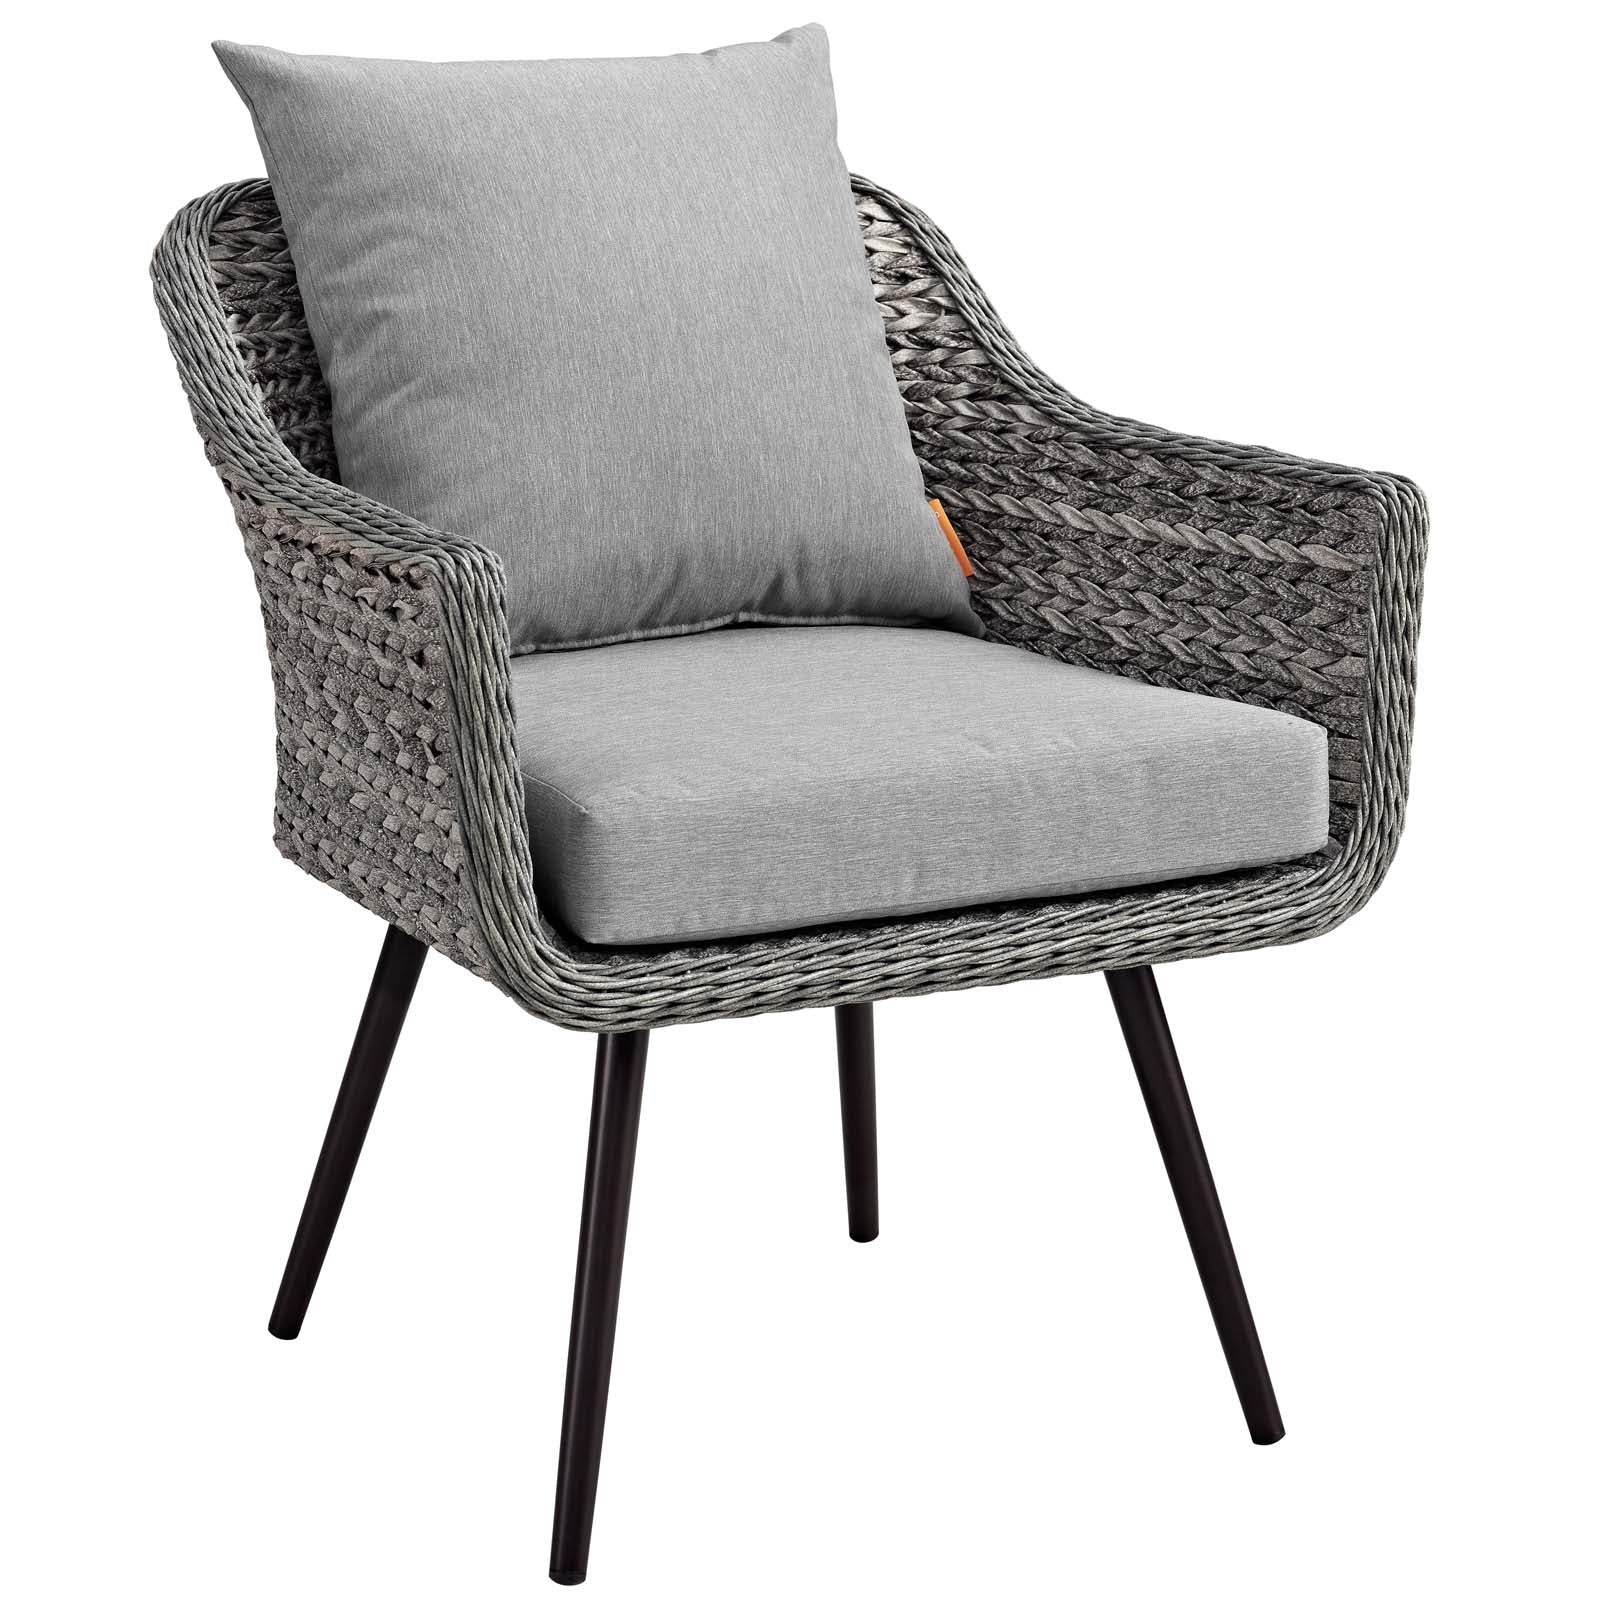 Endeavor Armchair Outdoor Patio Wicker Rattan Set of 2-Outdoor Set-Modway-Wall2Wall Furnishings